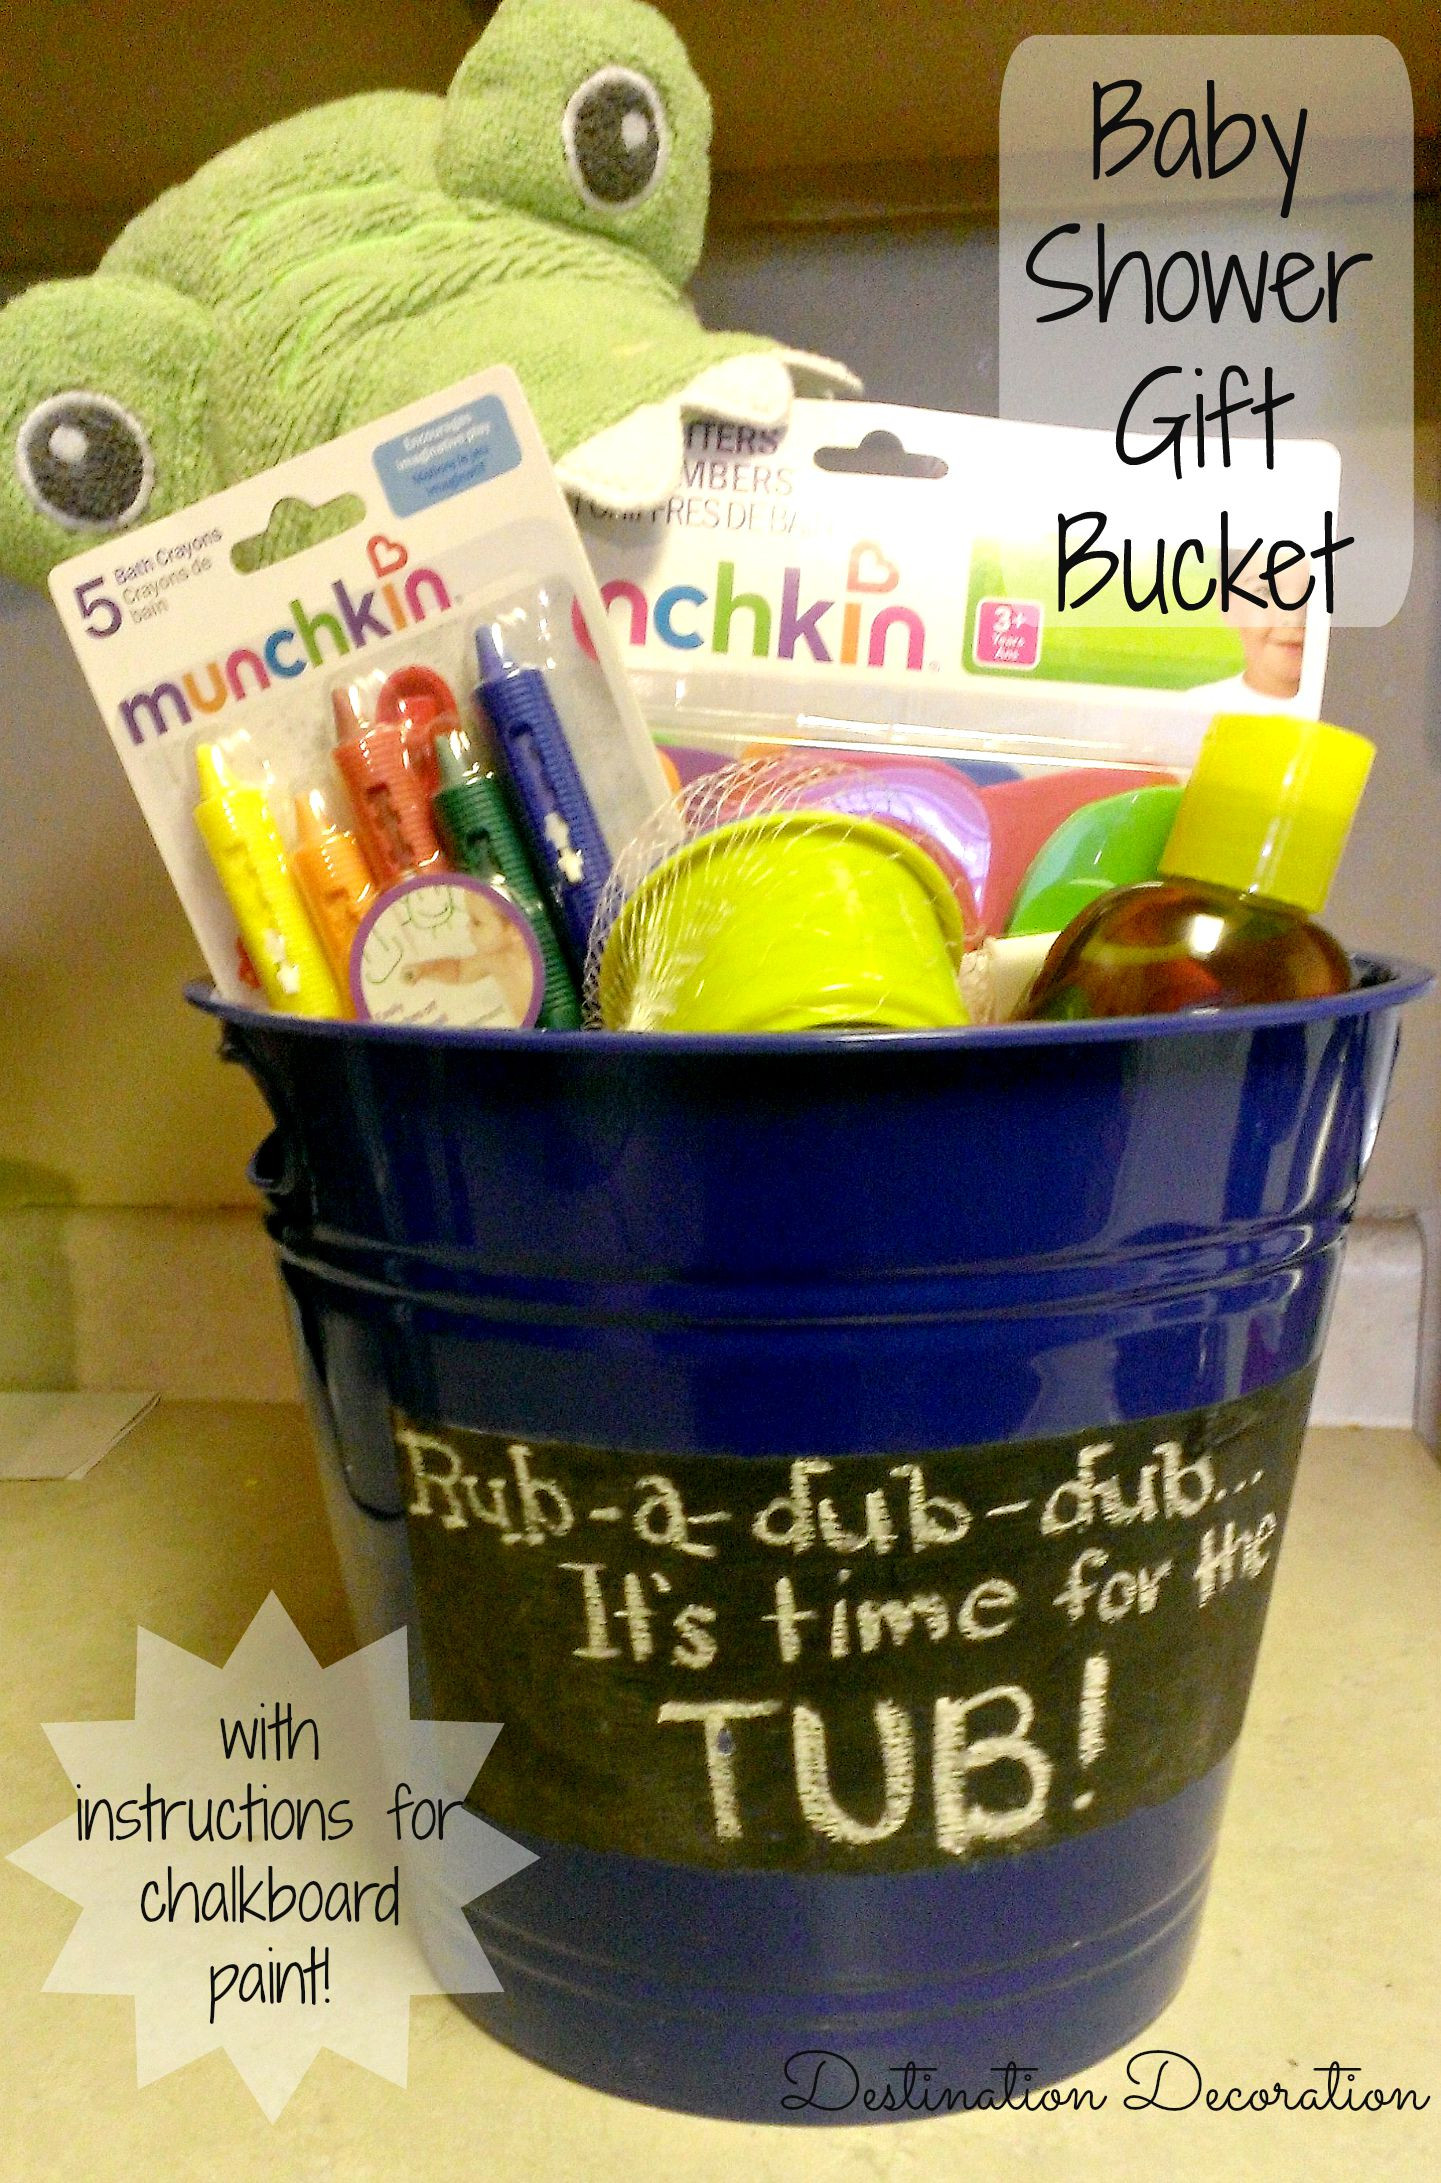 Baby Bath Gift Ideas
 Baby Shower Gift Bucket with Chalkboard Paint